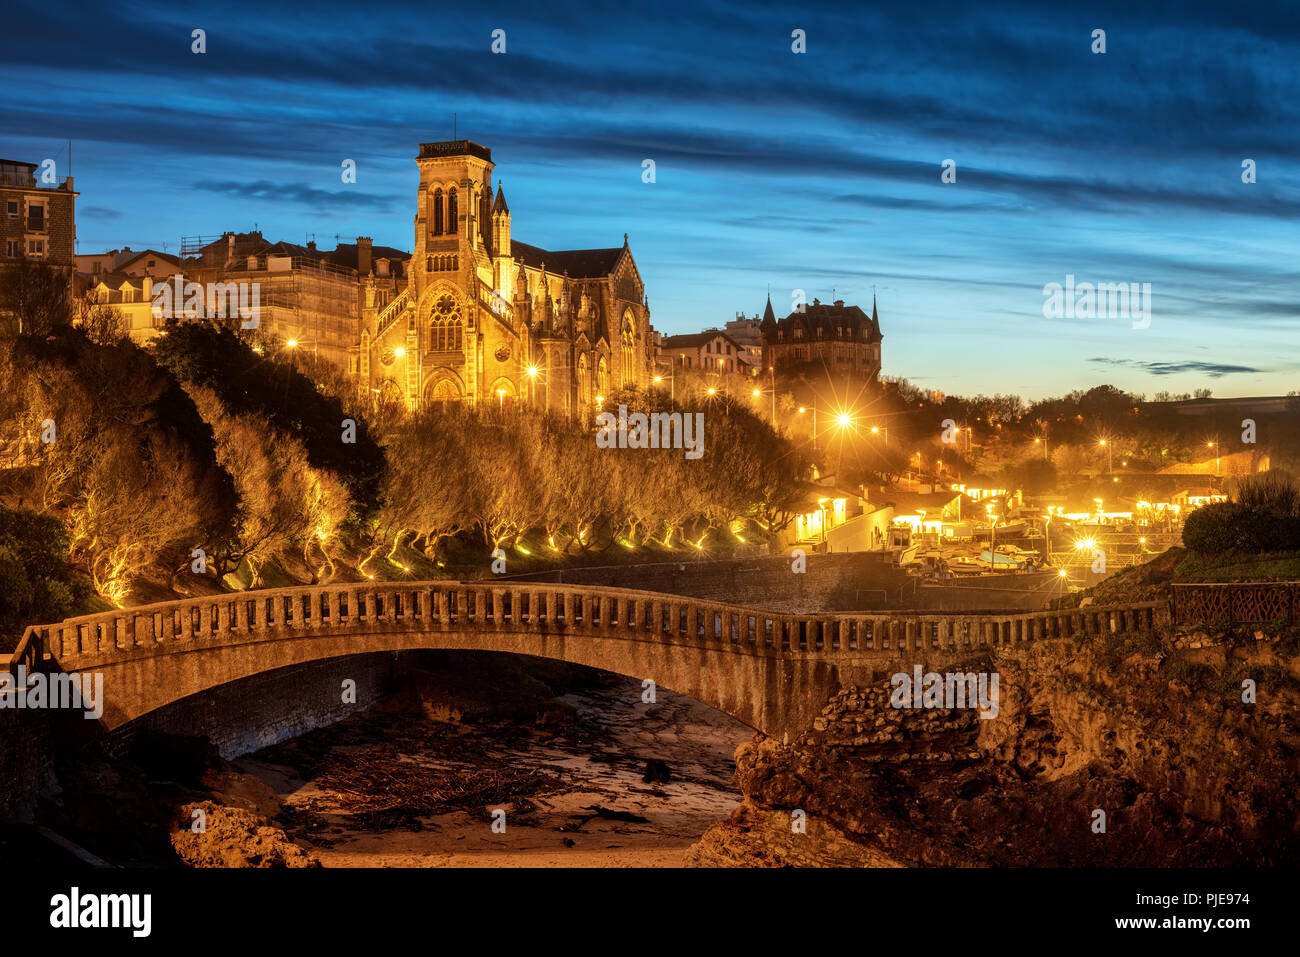 Biarritz, view of St Eugenia Church and Old Port at late evening light, Basque country, France Stock Photo